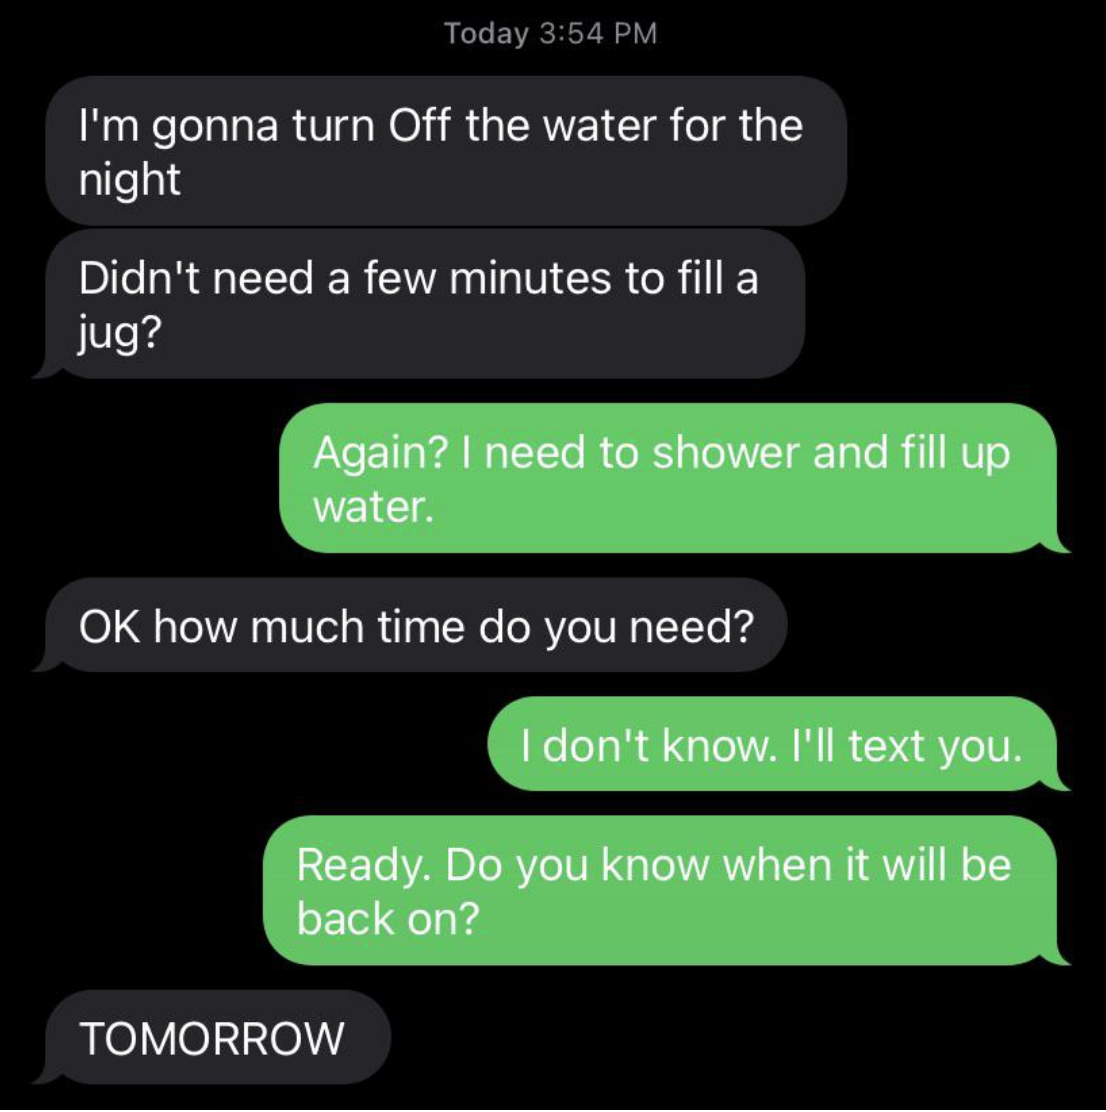 Text message conversation about water being off and coordinating to fill a jug, planning to update later